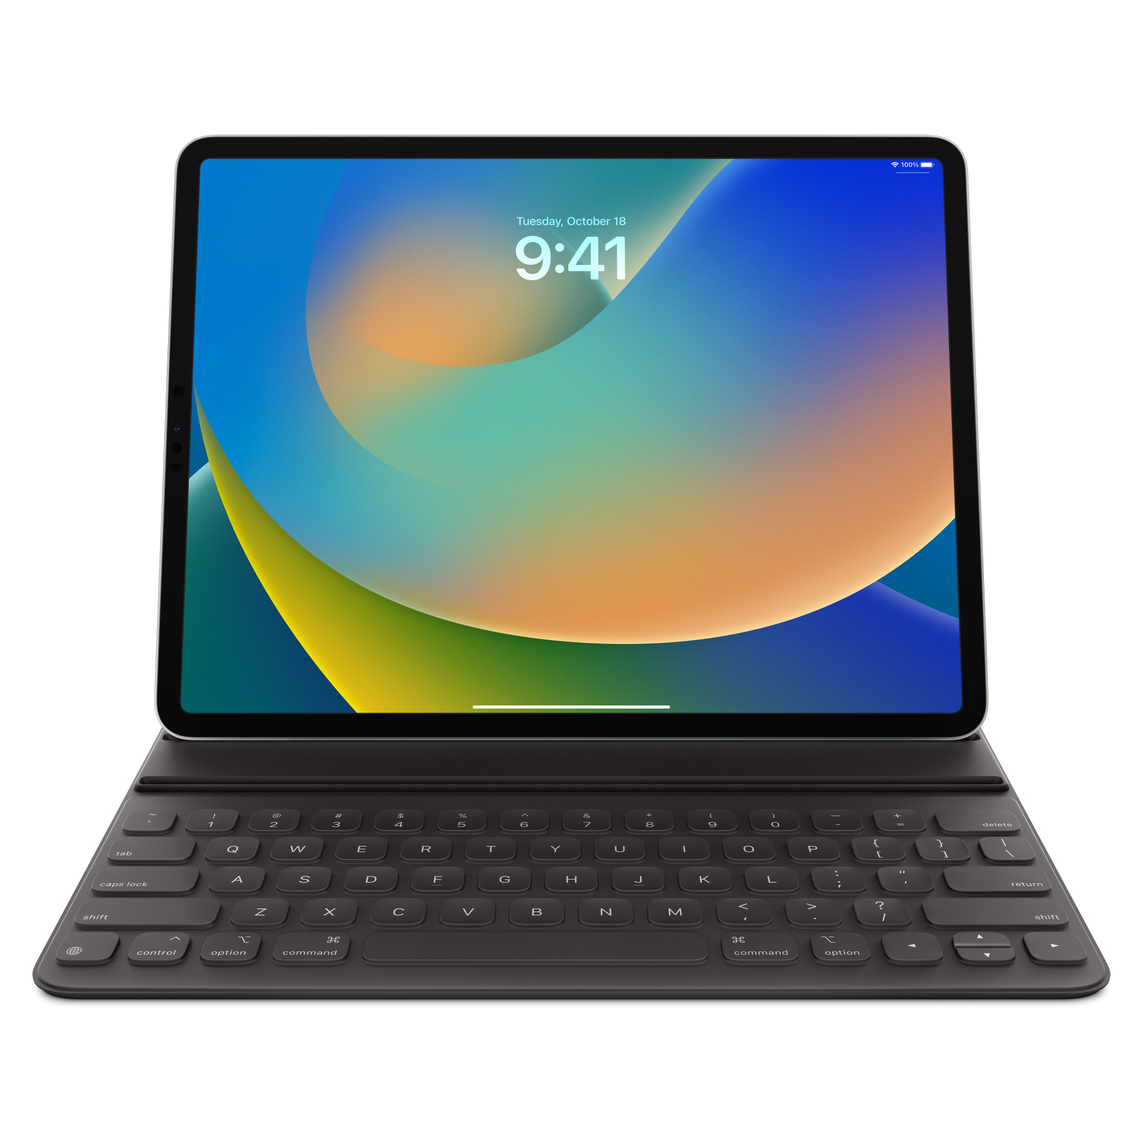 Smart Keyboard Folio for iPad Pro 12.9-inch (5th generation) in black, attached to its companion iPad Pro.